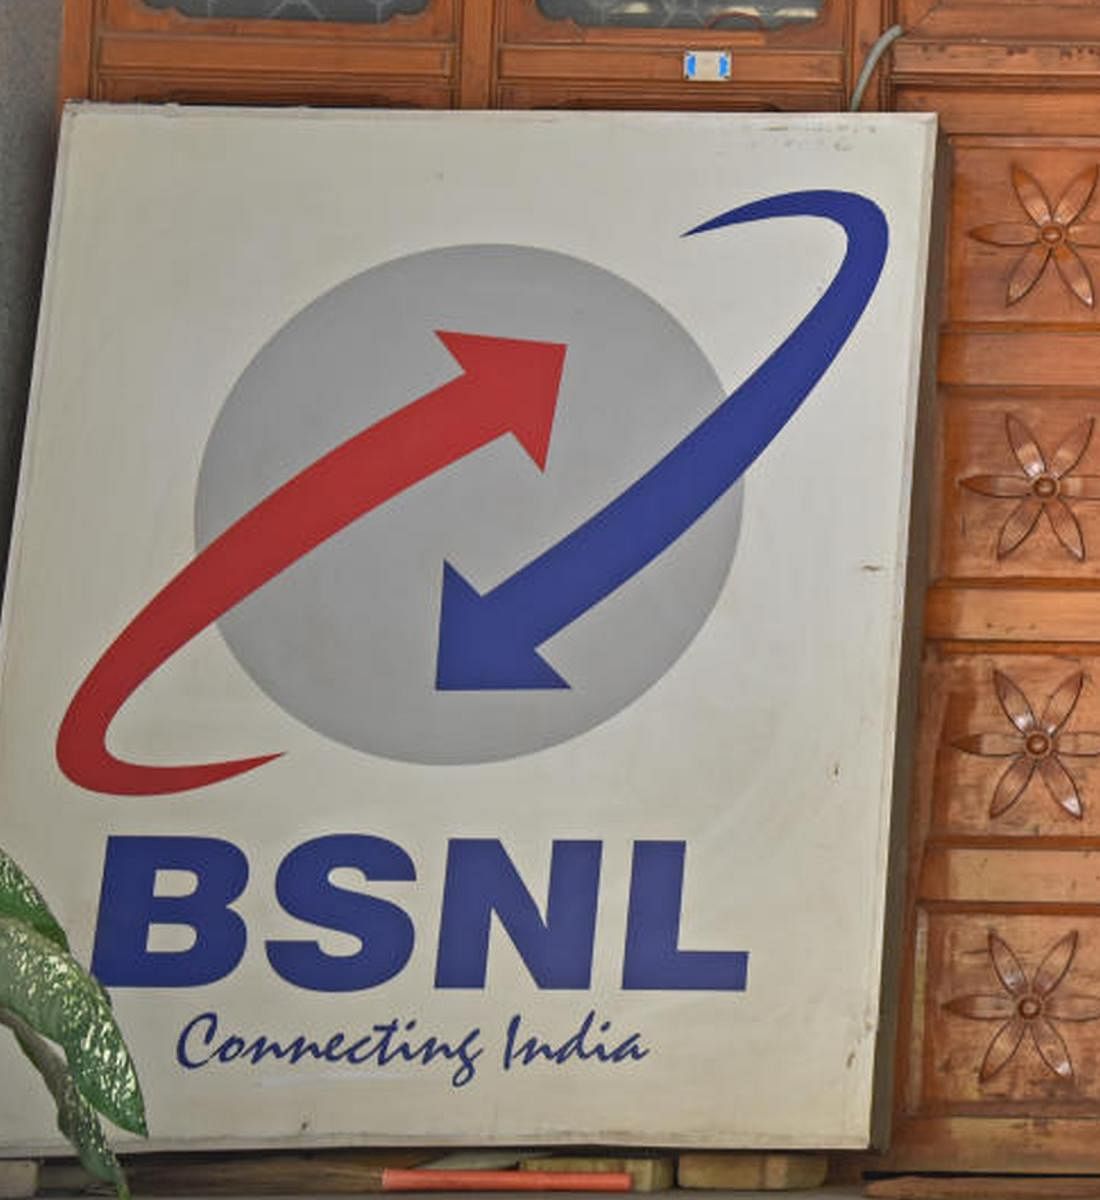 BSNL expects boost in market share